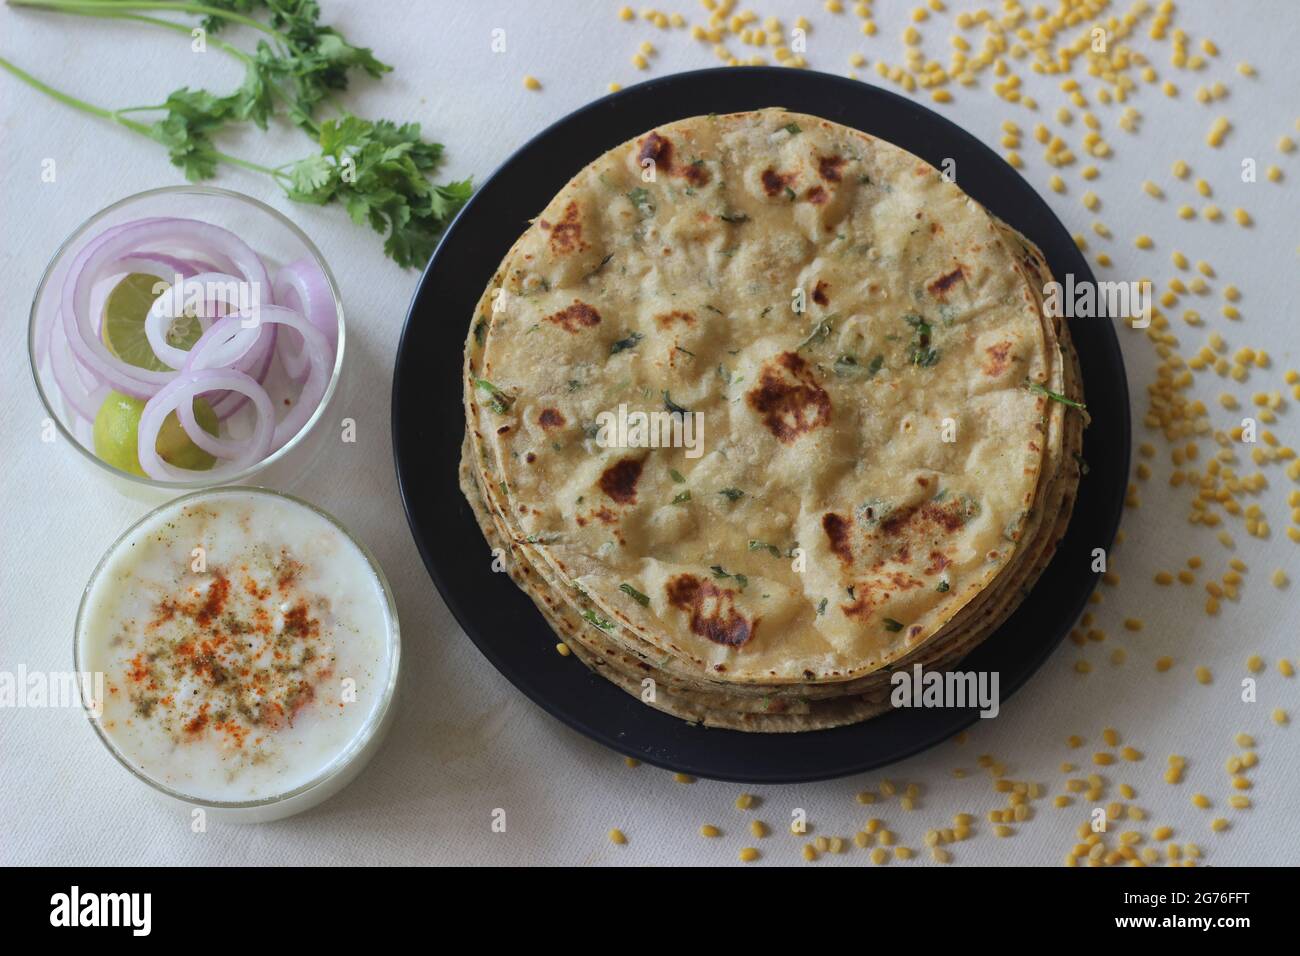 A high protein Indian flat bread with whole wheat and lentils. Popularly known as moong dal paratha in many parts of India. Shot on white background. Stock Photo